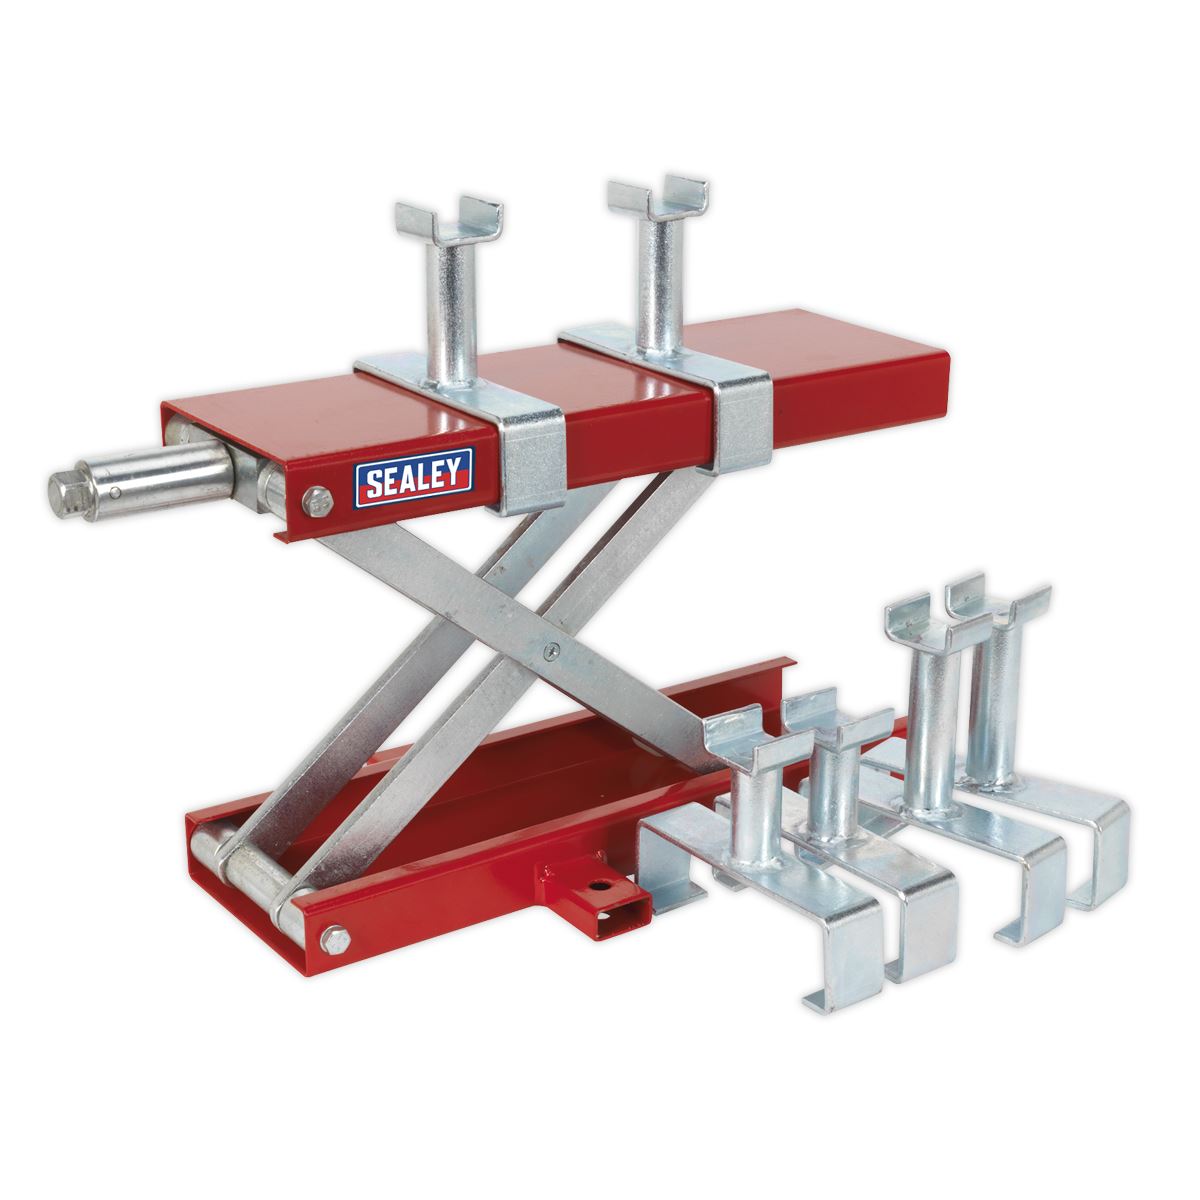 Sealey Scissor Stand for Motorcycles 300kg